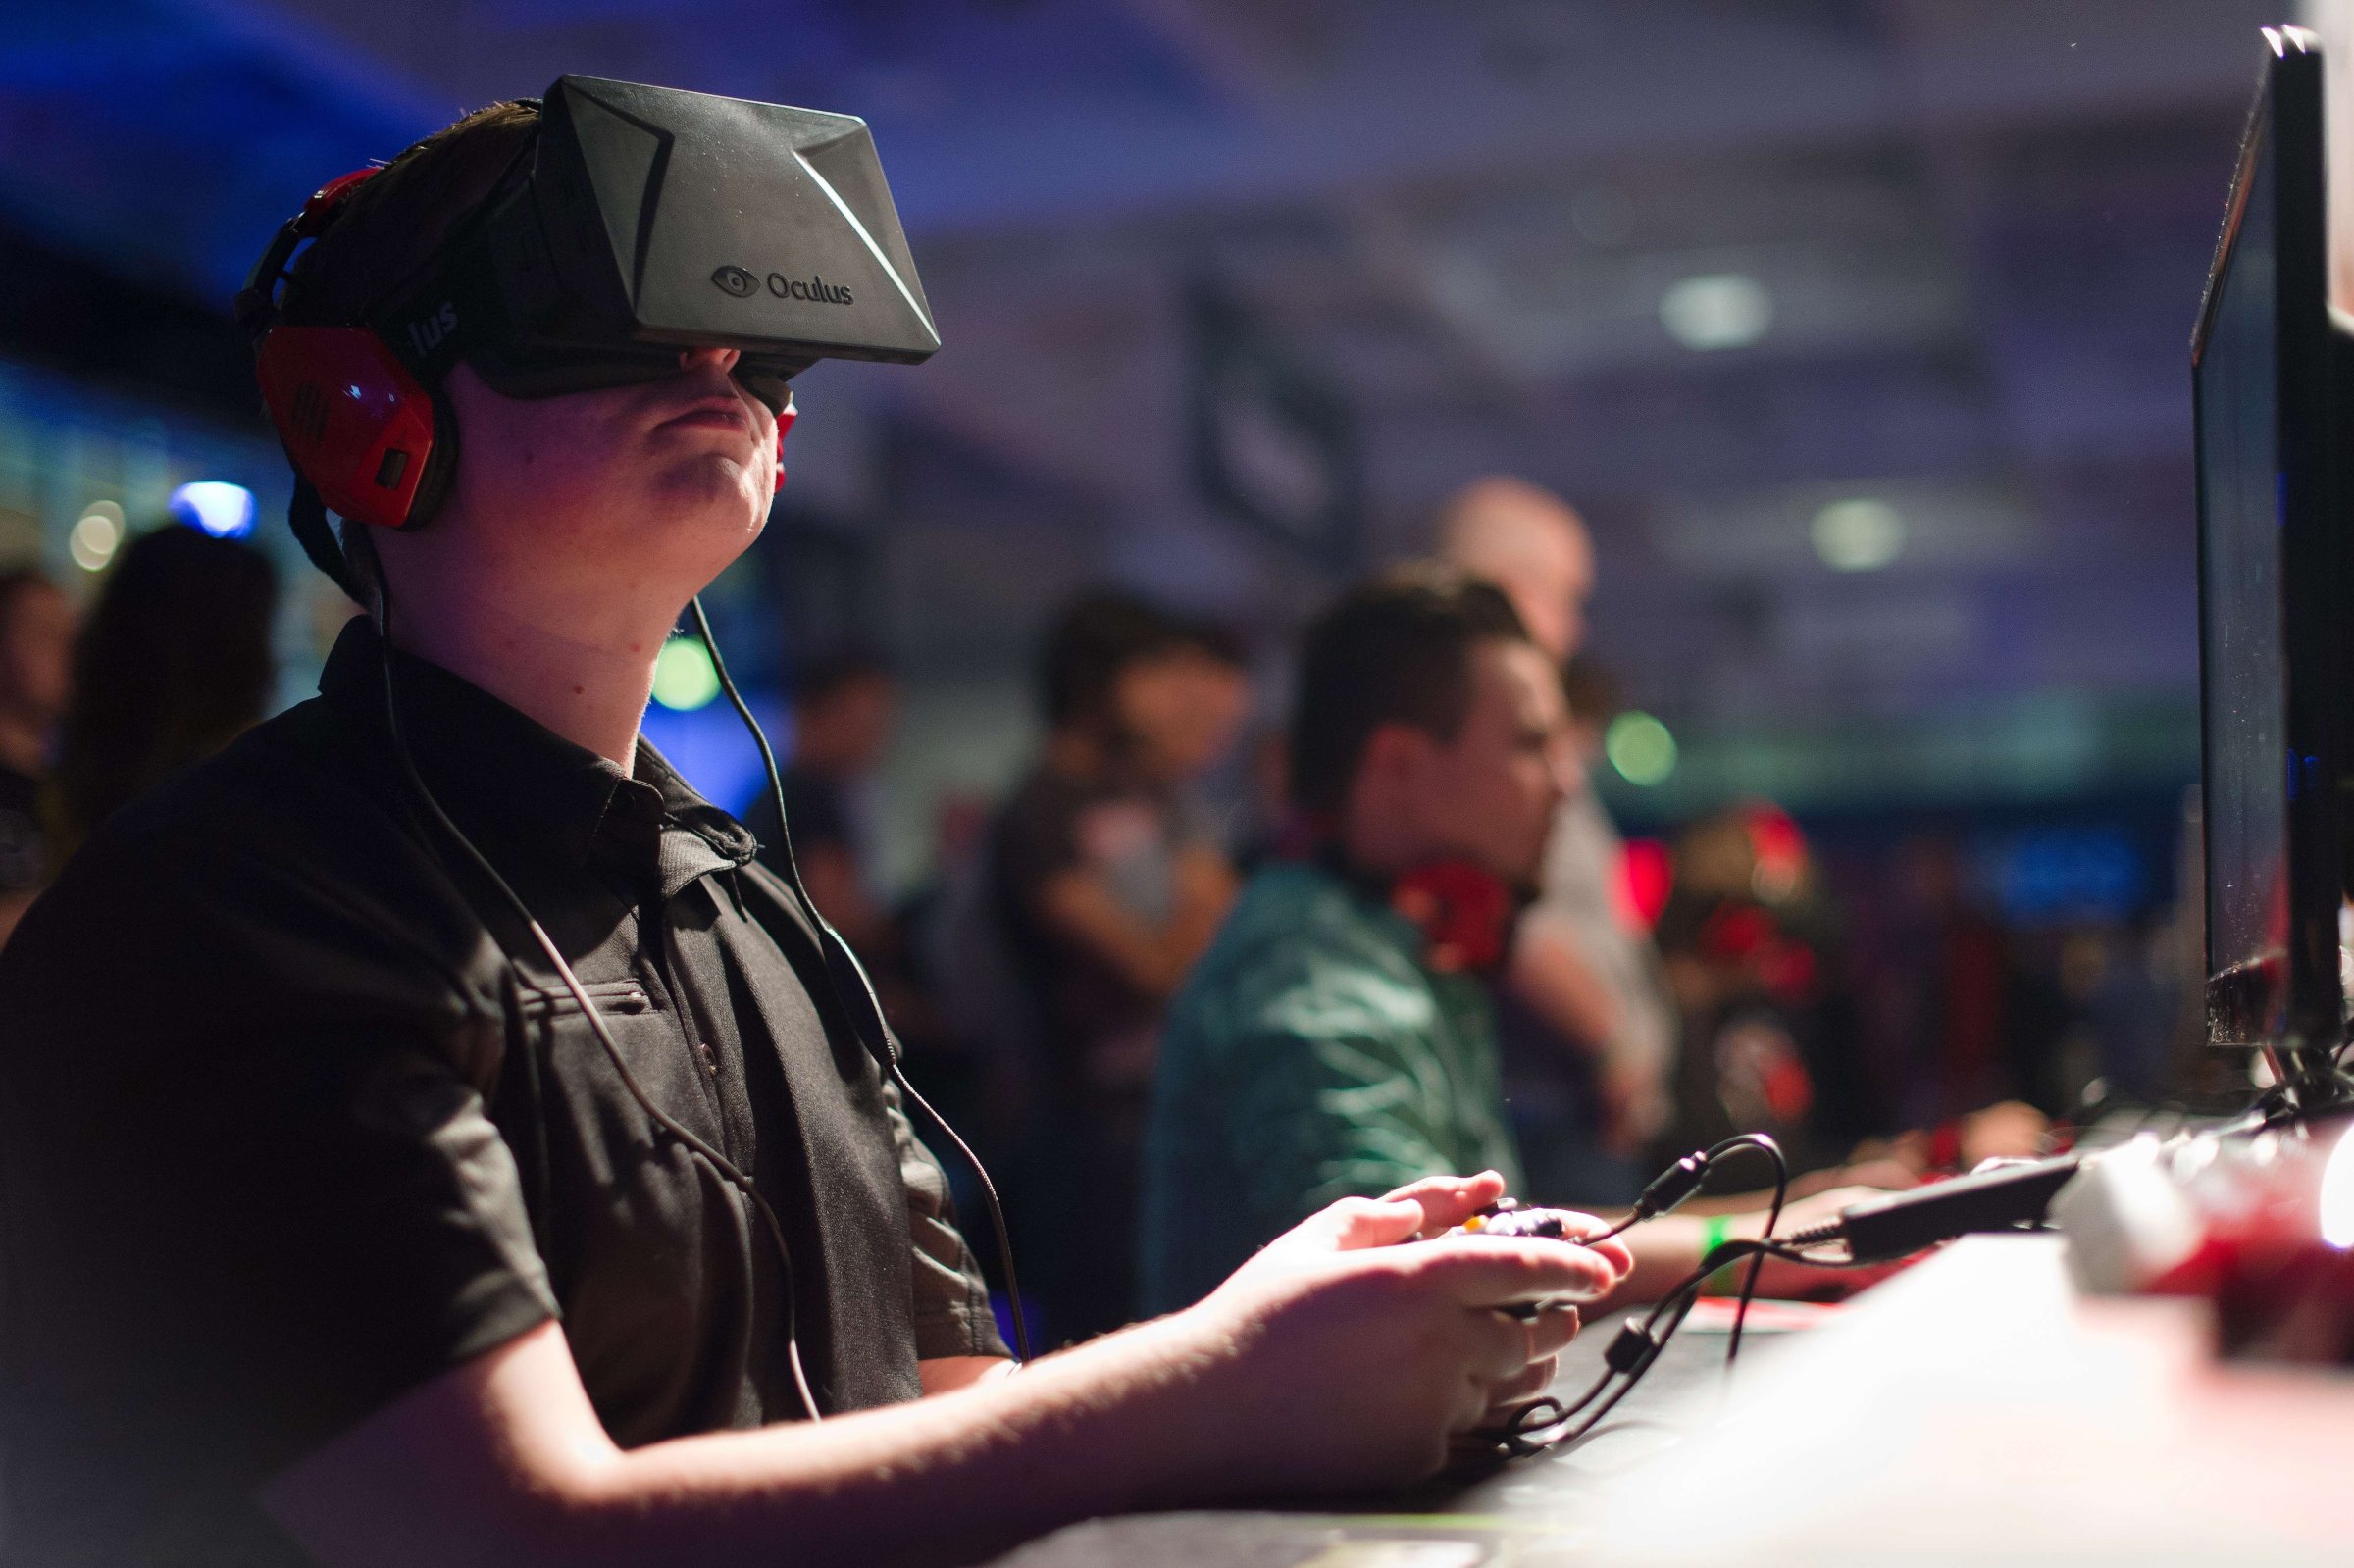 A gamer uses an Oculus virtual reality headset at the Eurogamer Expo 2013 in London.